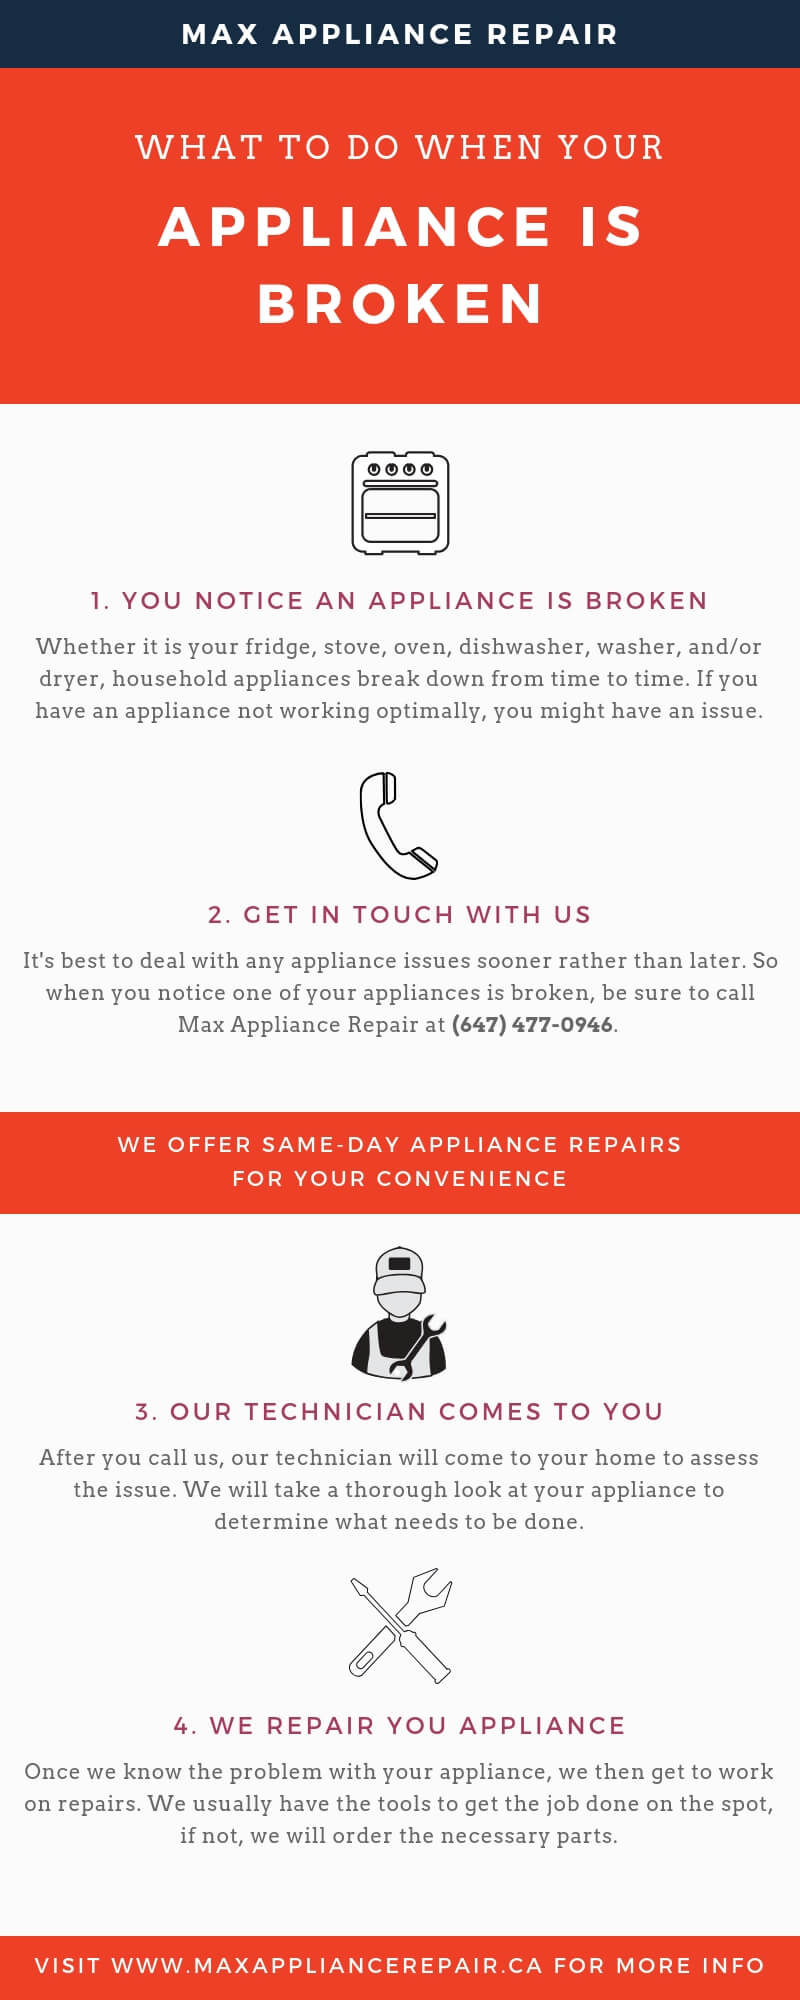 max appliance repair infographic